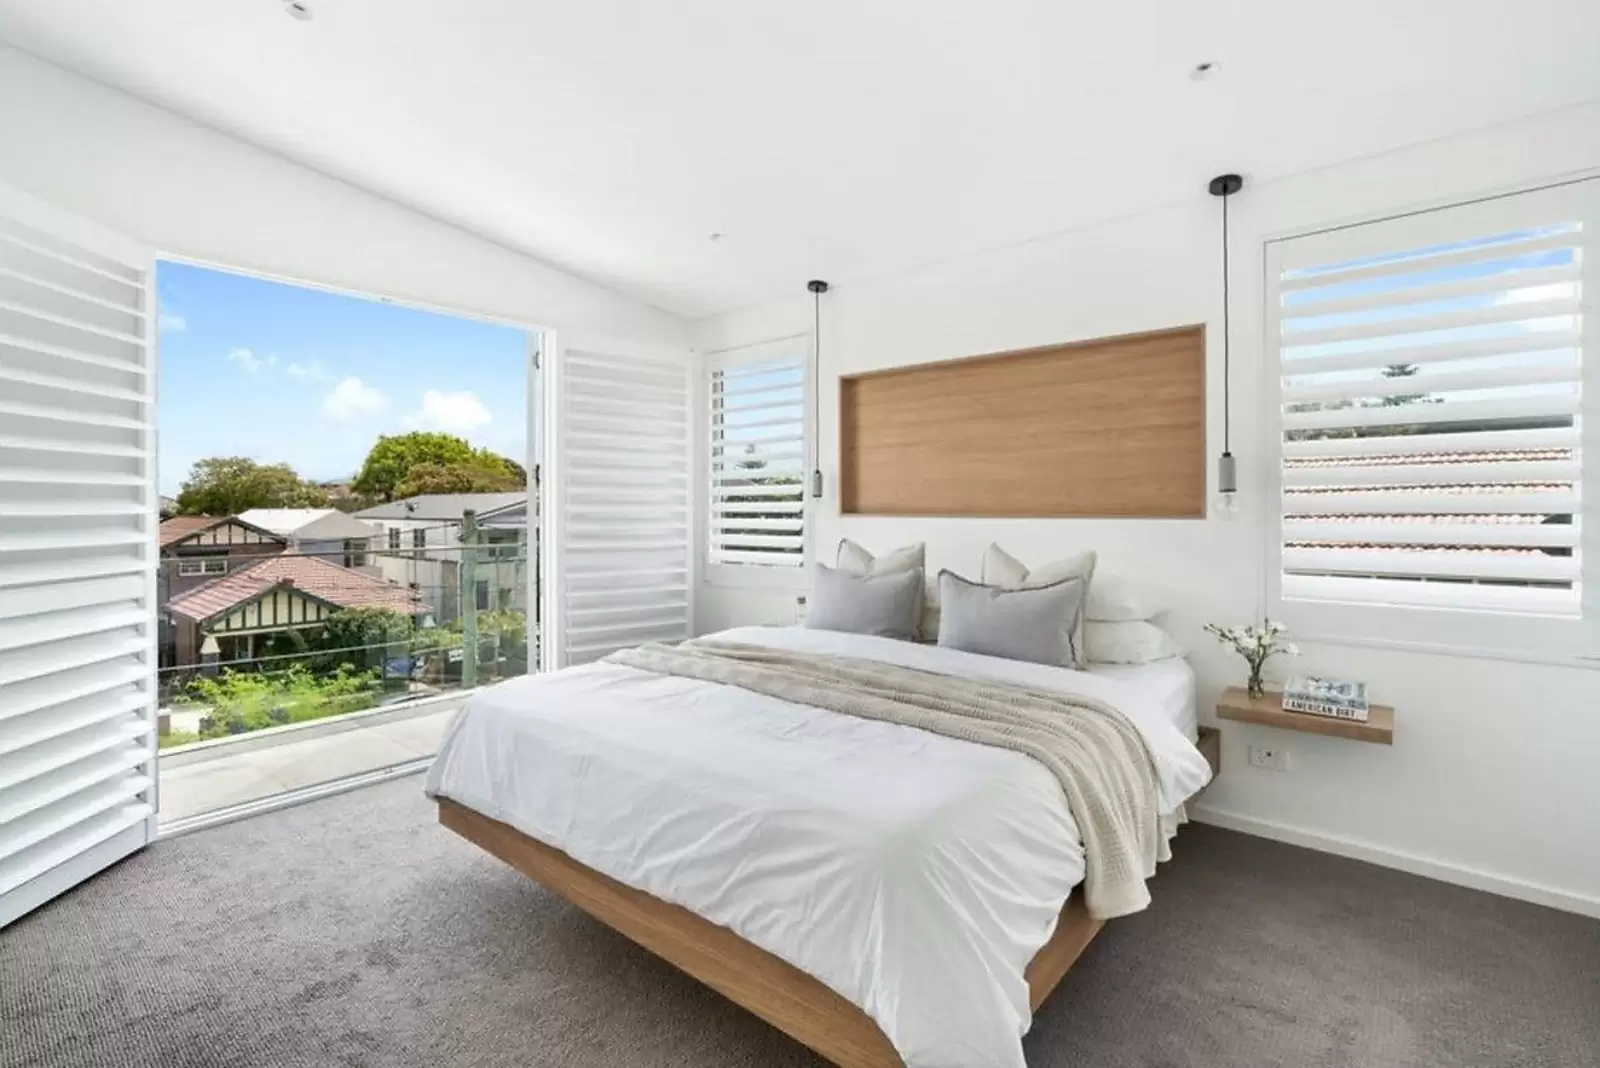 Photo #7: 15a Higgs Street, Coogee - Sold by Sydney Sotheby's International Realty